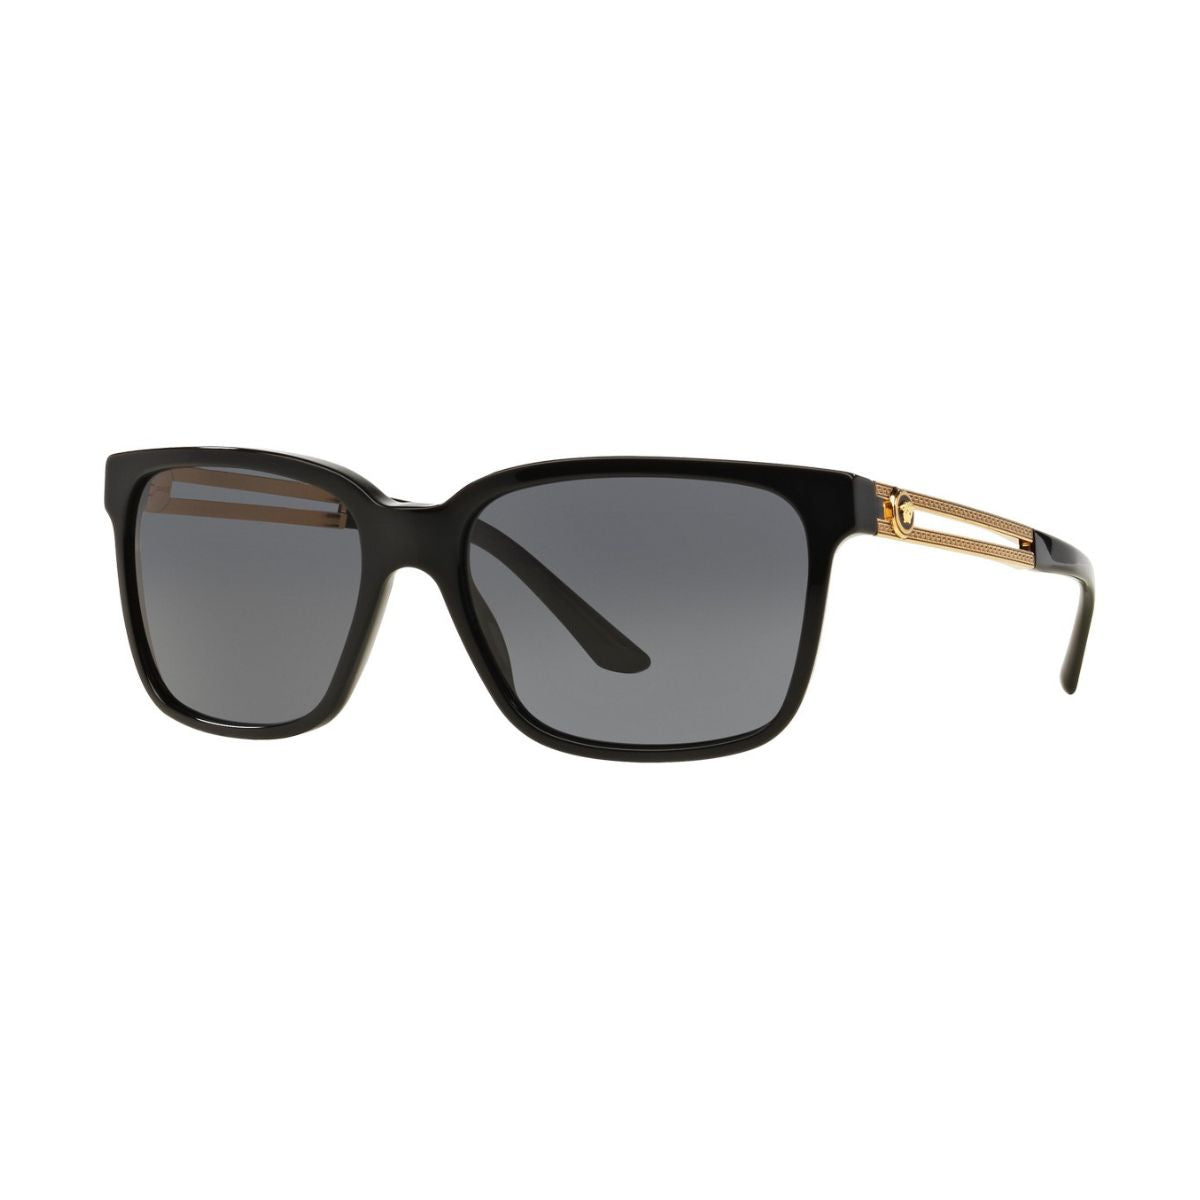 "Versace 4307 GB1/87 Sunglasses for Men and Women at Optorium. Shop now for stylish black and gold shades."